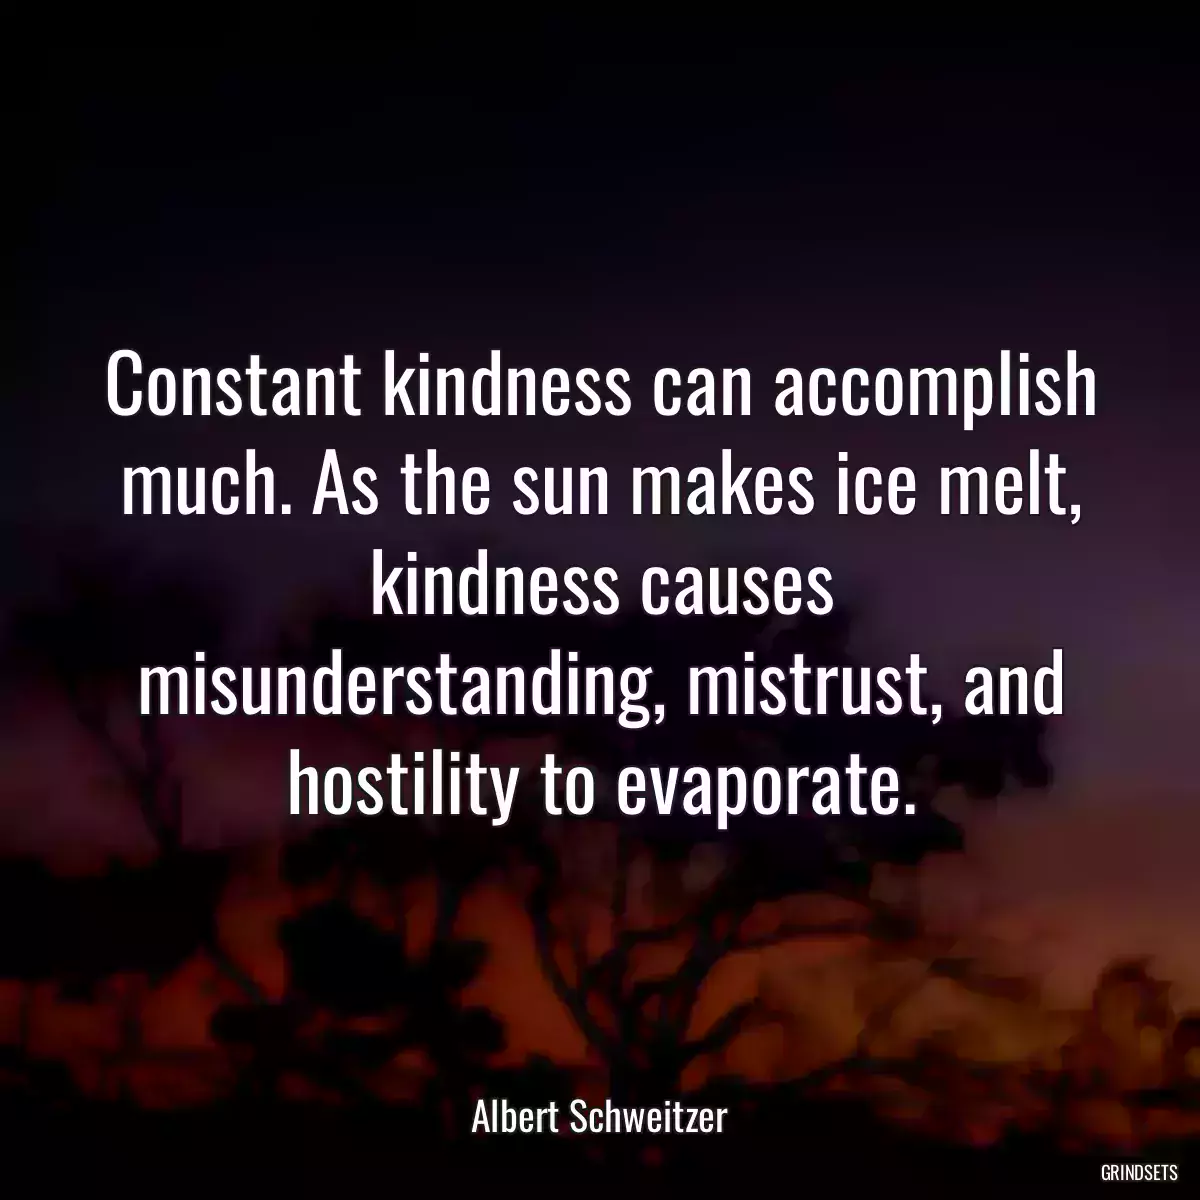 Constant kindness can accomplish much. As the sun makes ice melt, kindness causes misunderstanding, mistrust, and hostility to evaporate.